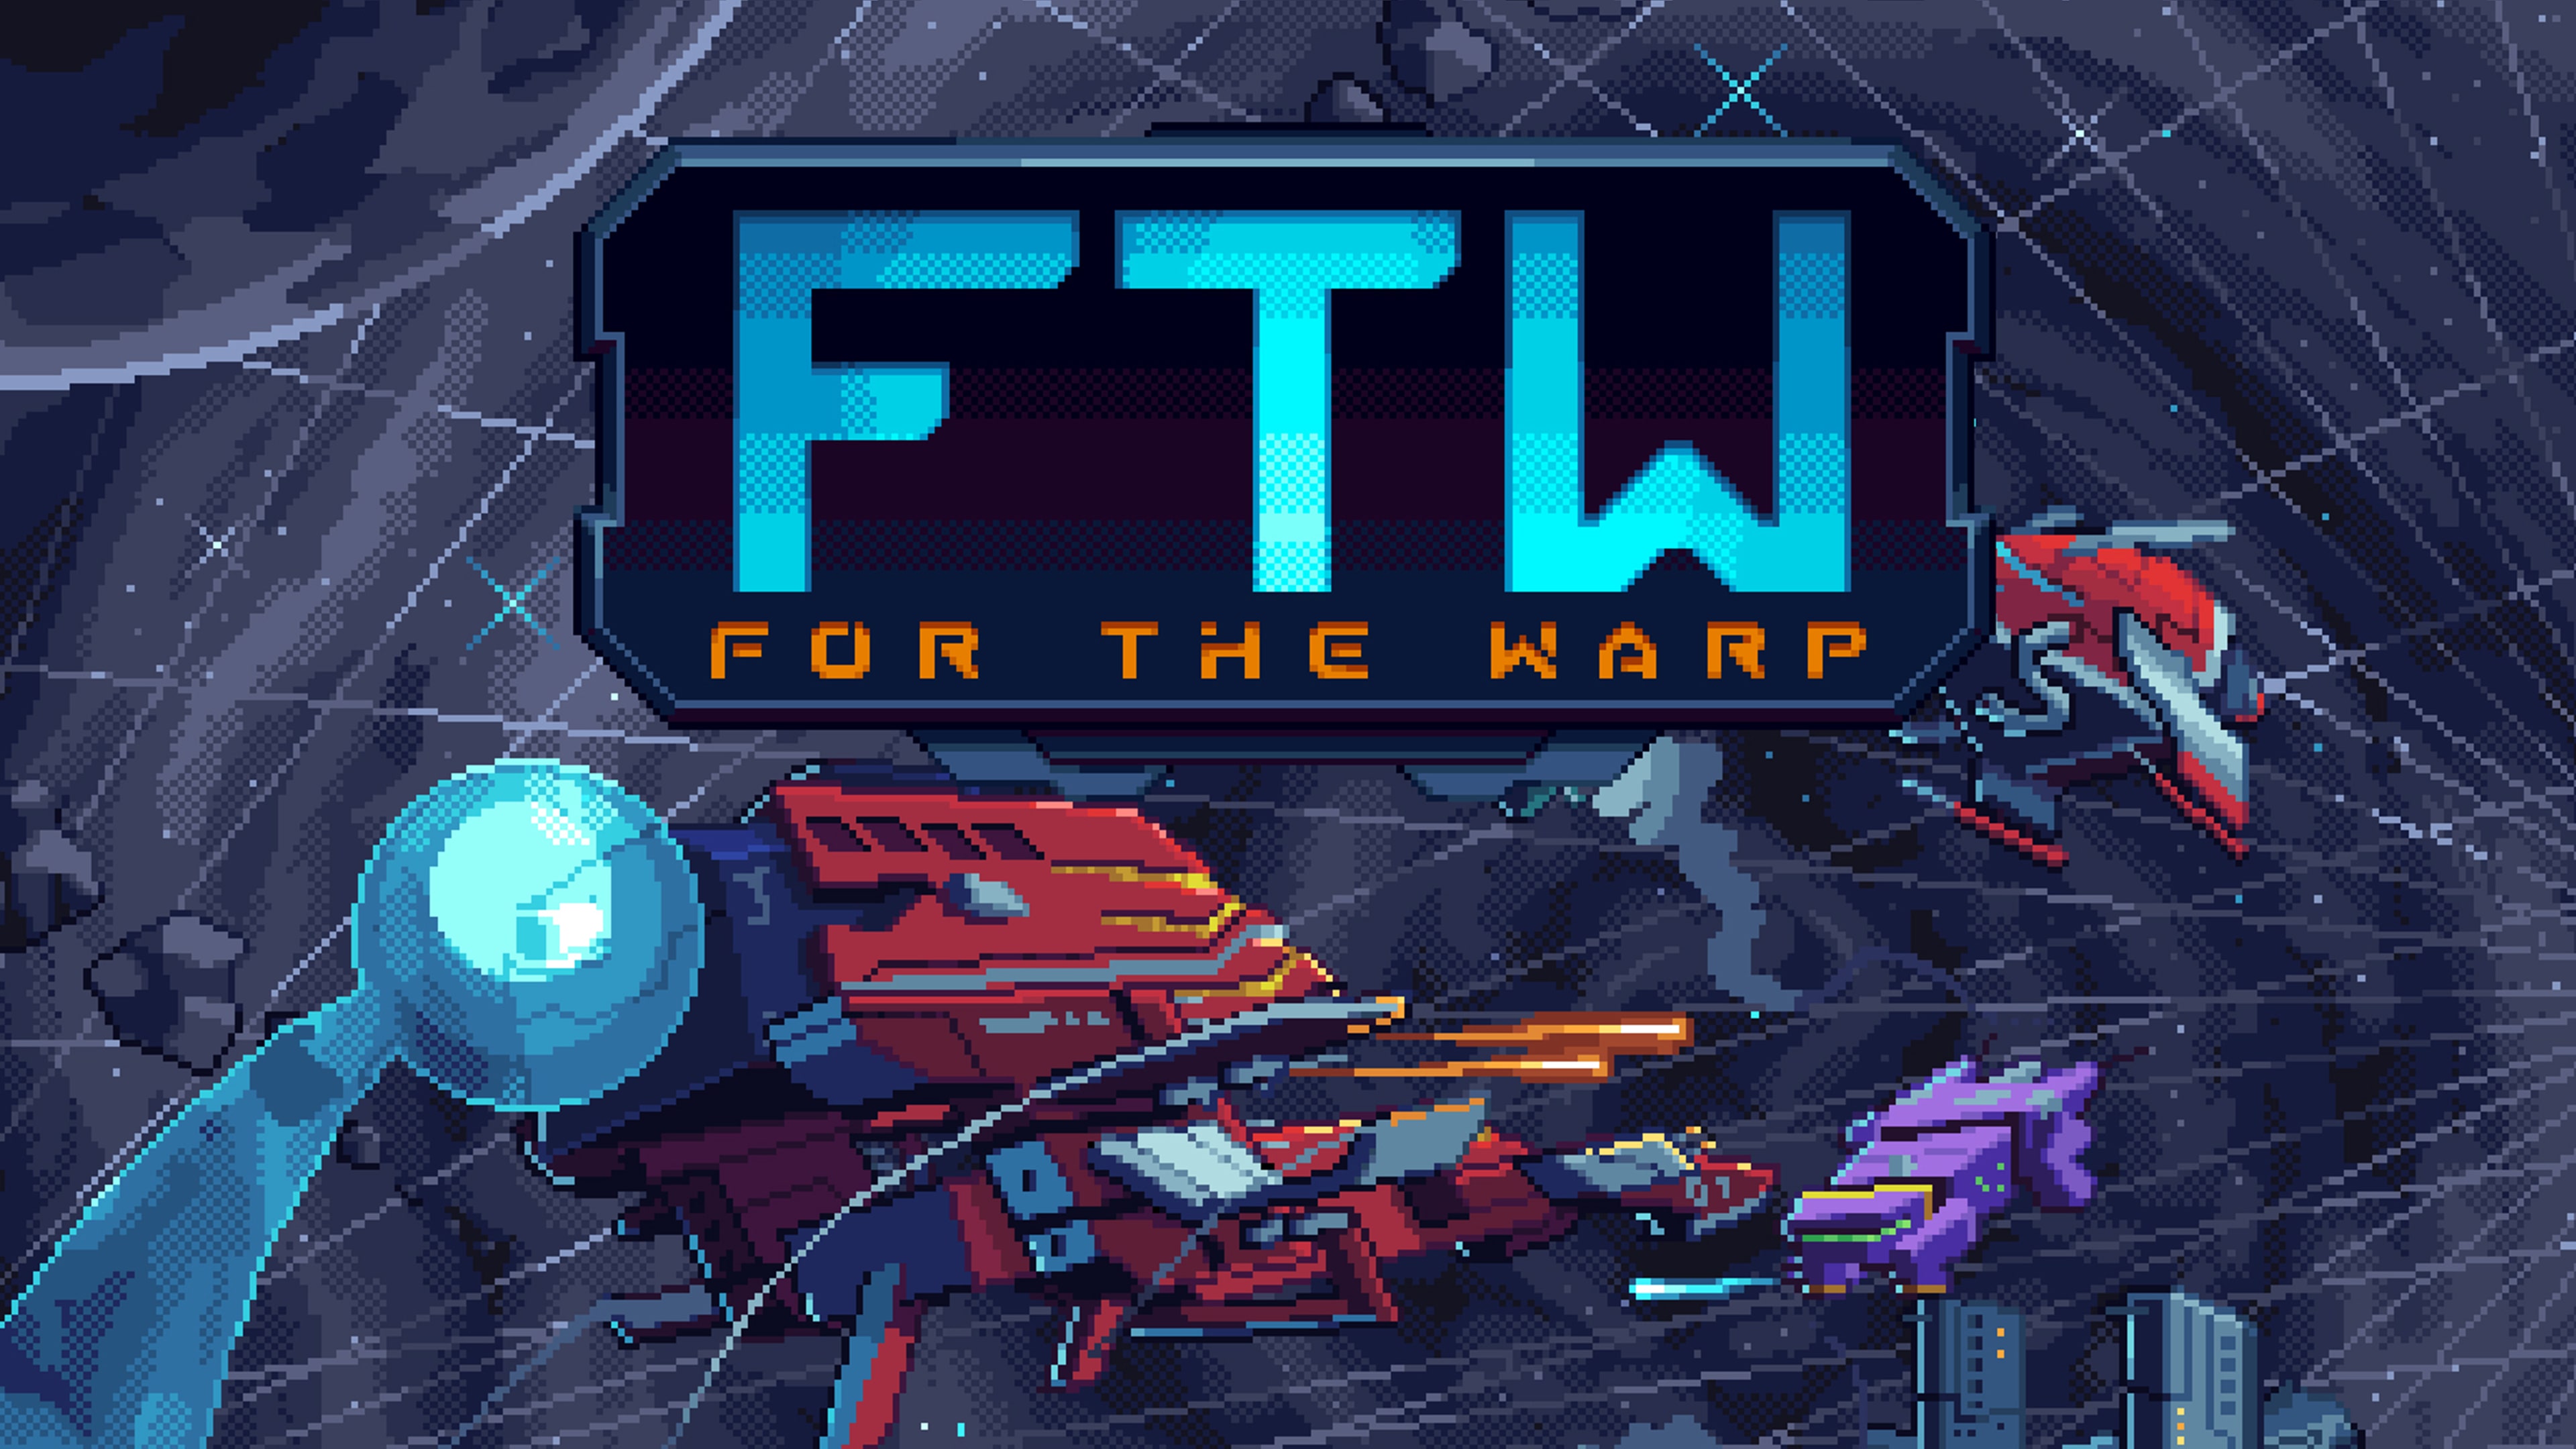 For the Warp